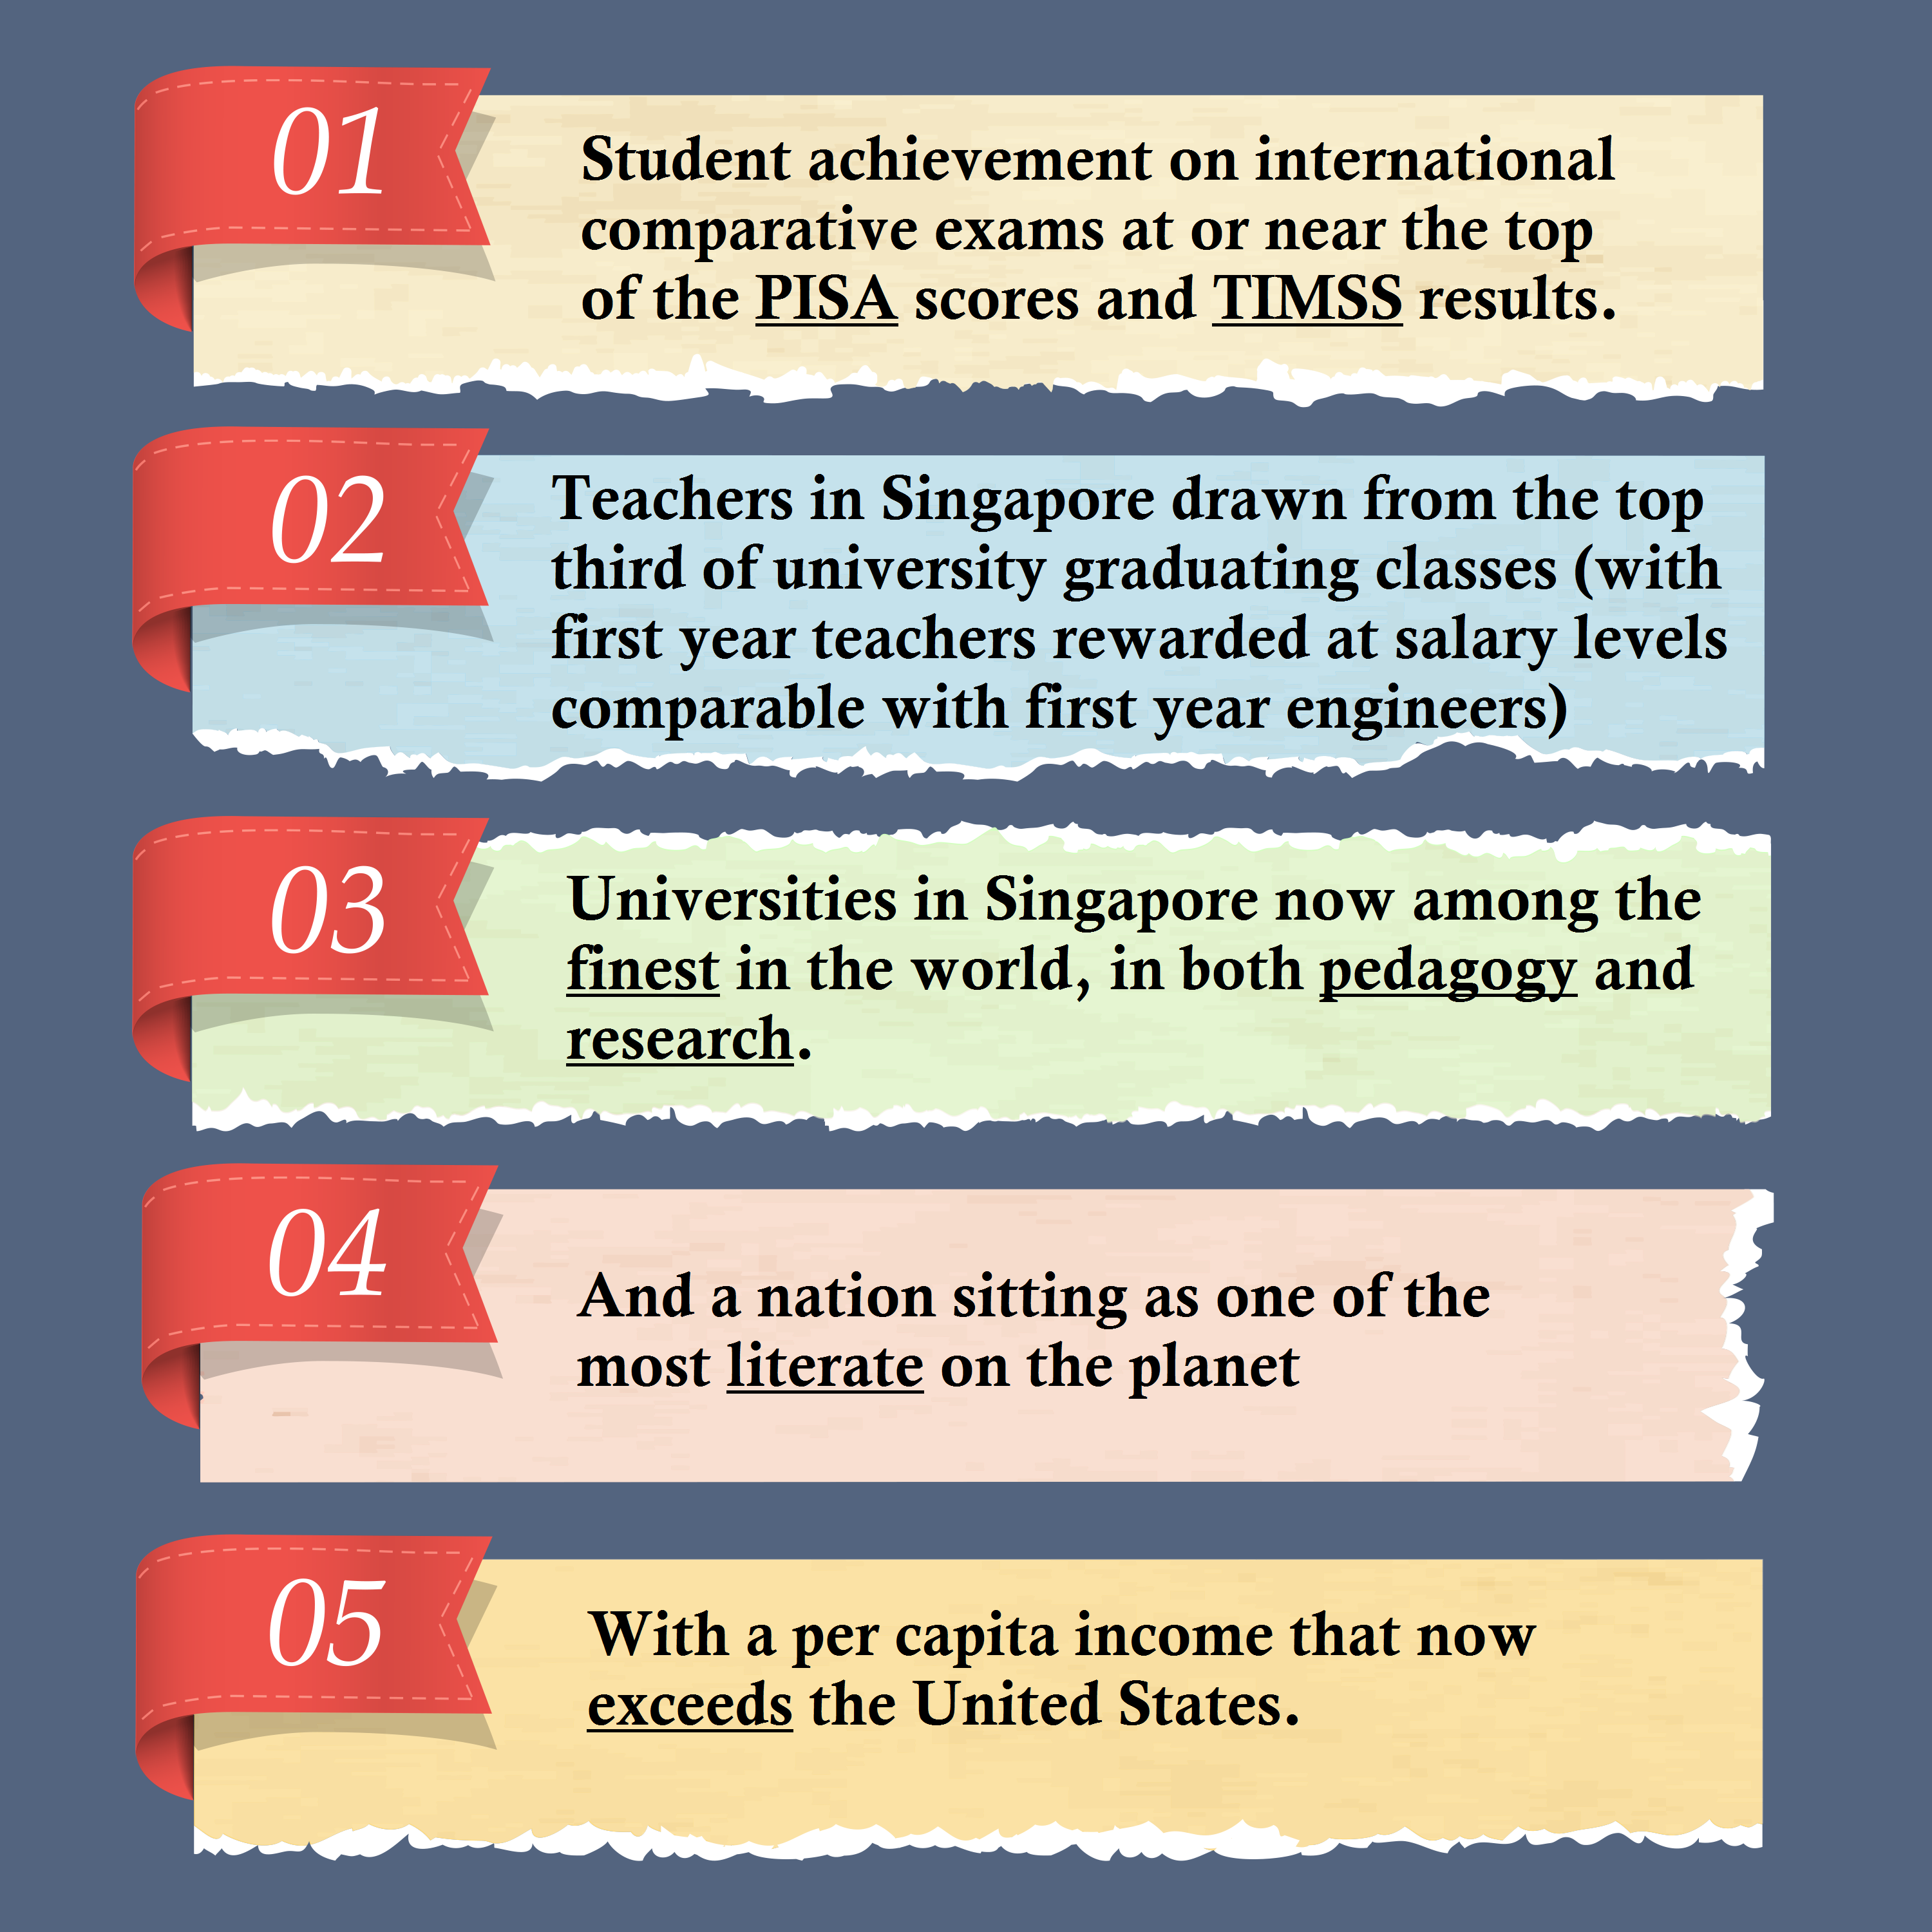 Evolution of education system in Singapore